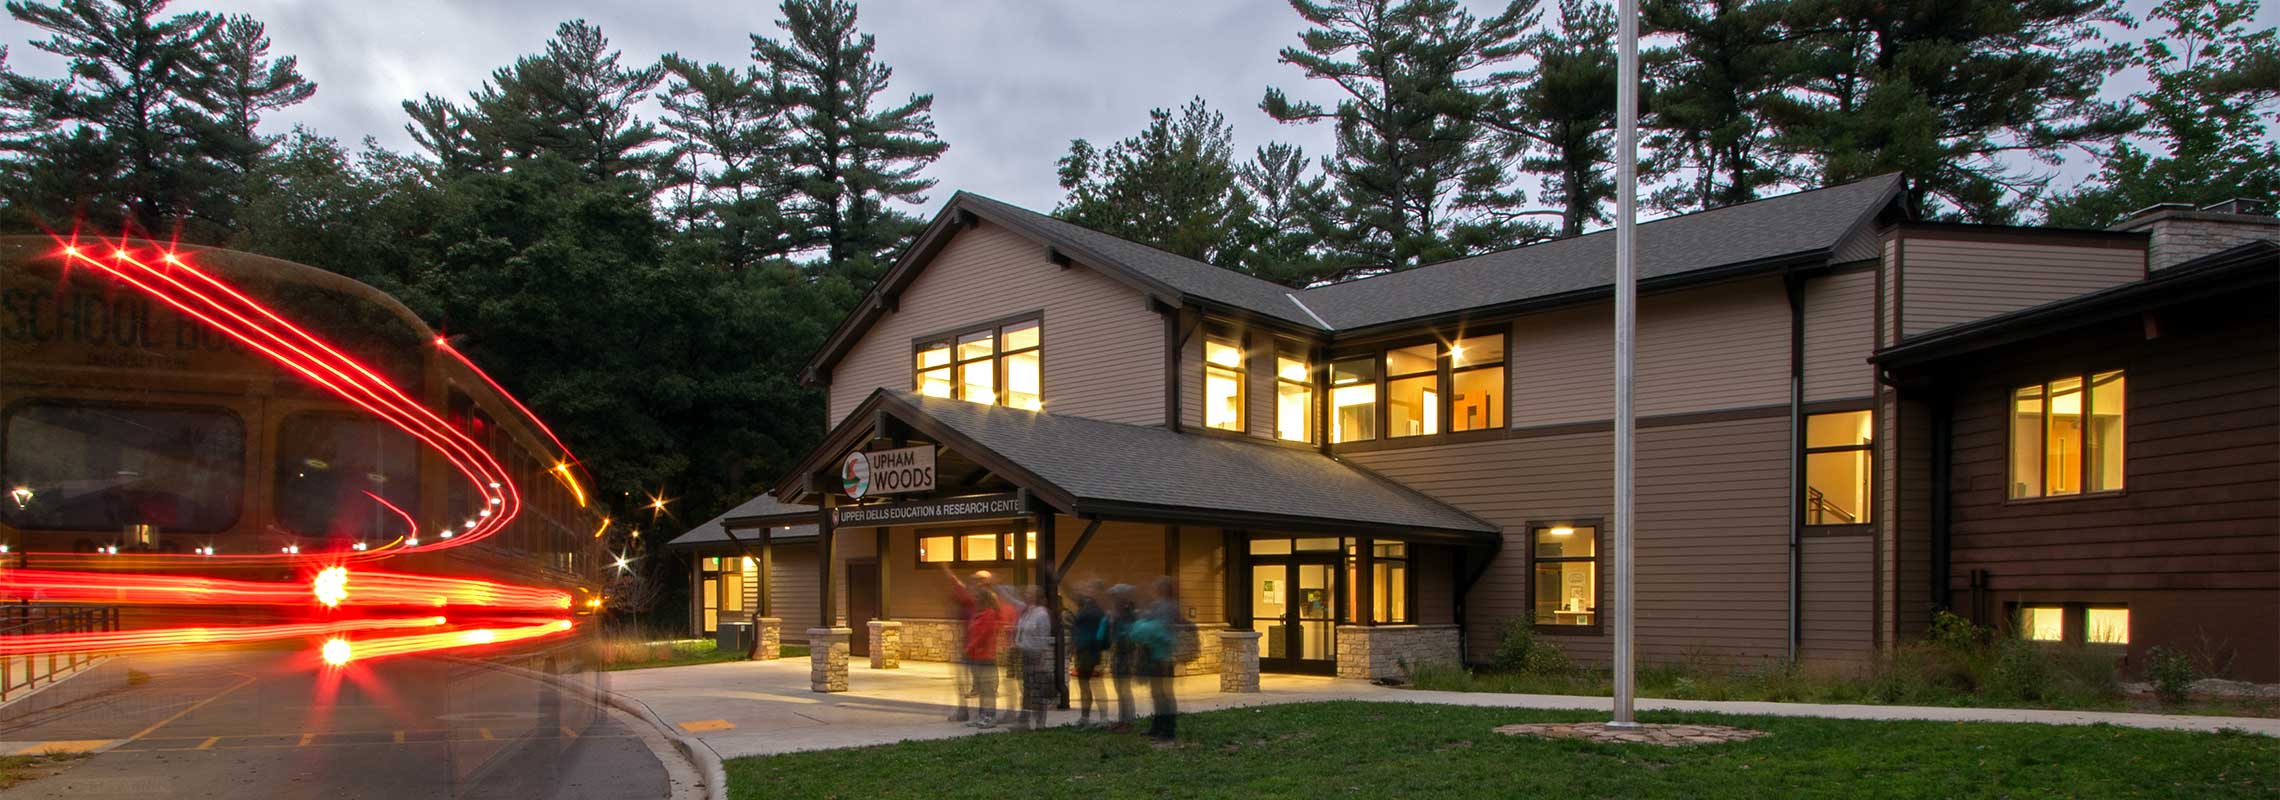 Upham woods front entrance in the early evening with a small group of people standing on the sidewalk in front of the building